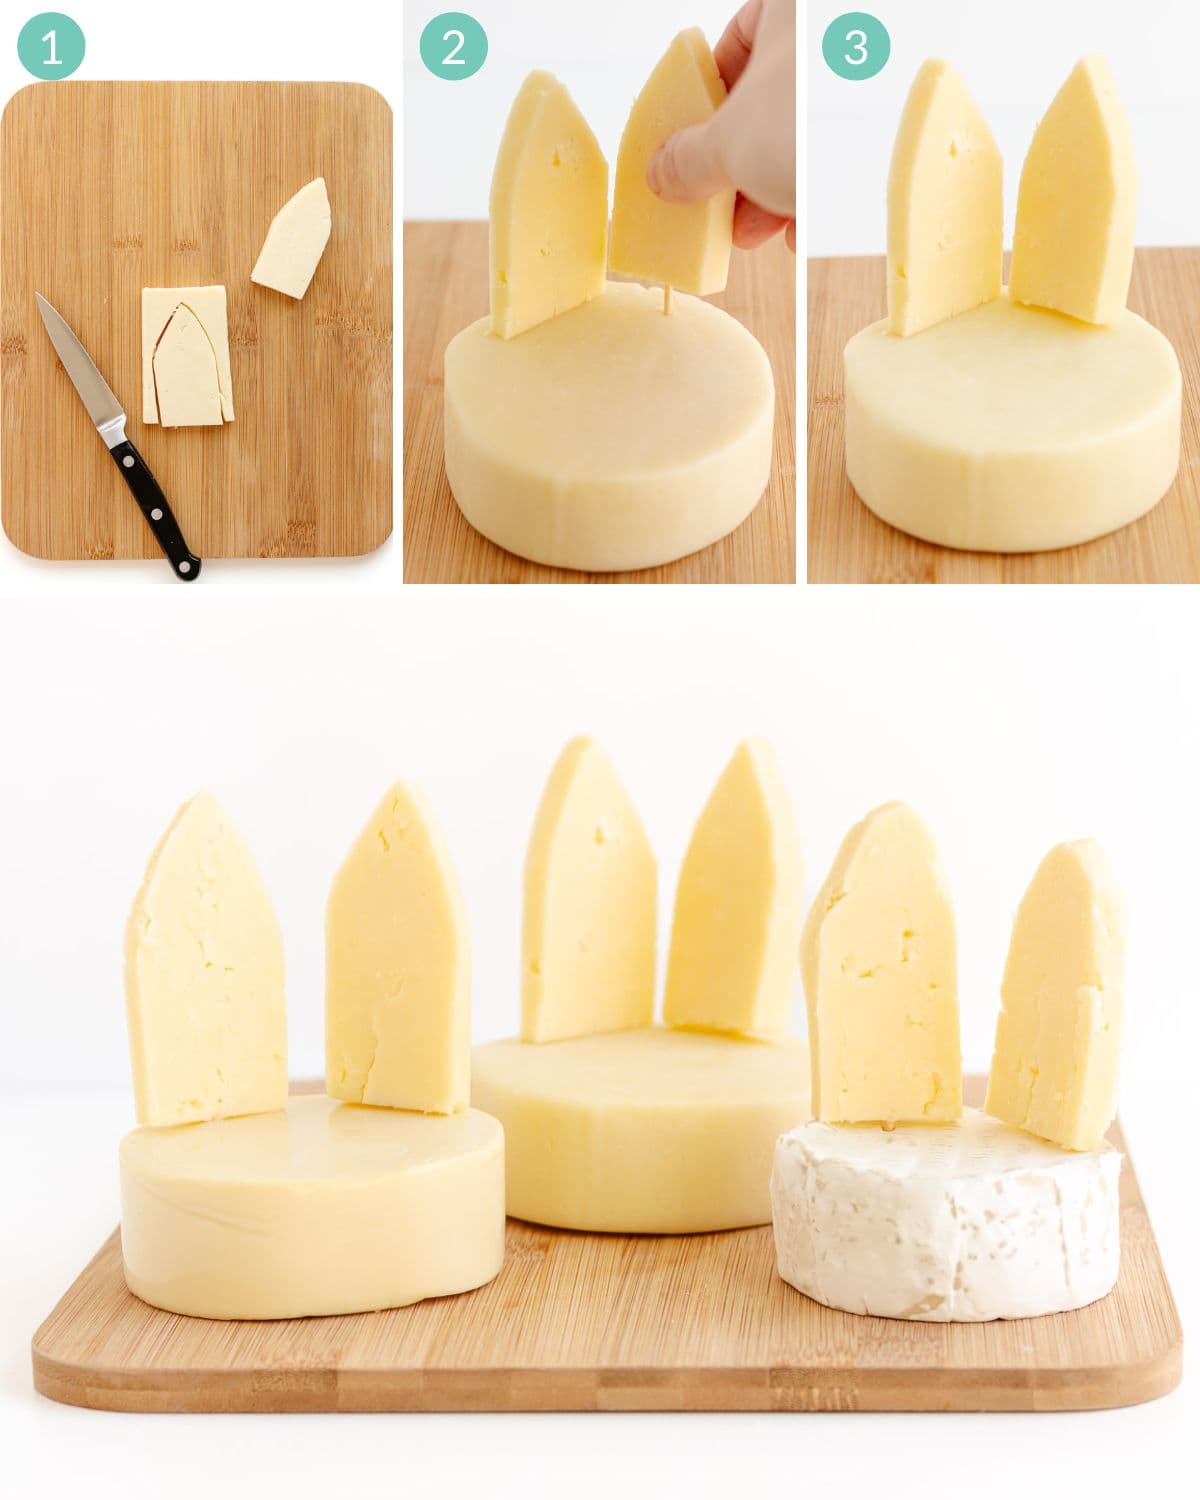 Step-by-step photo collage showing how to make simple cheese bunnies.